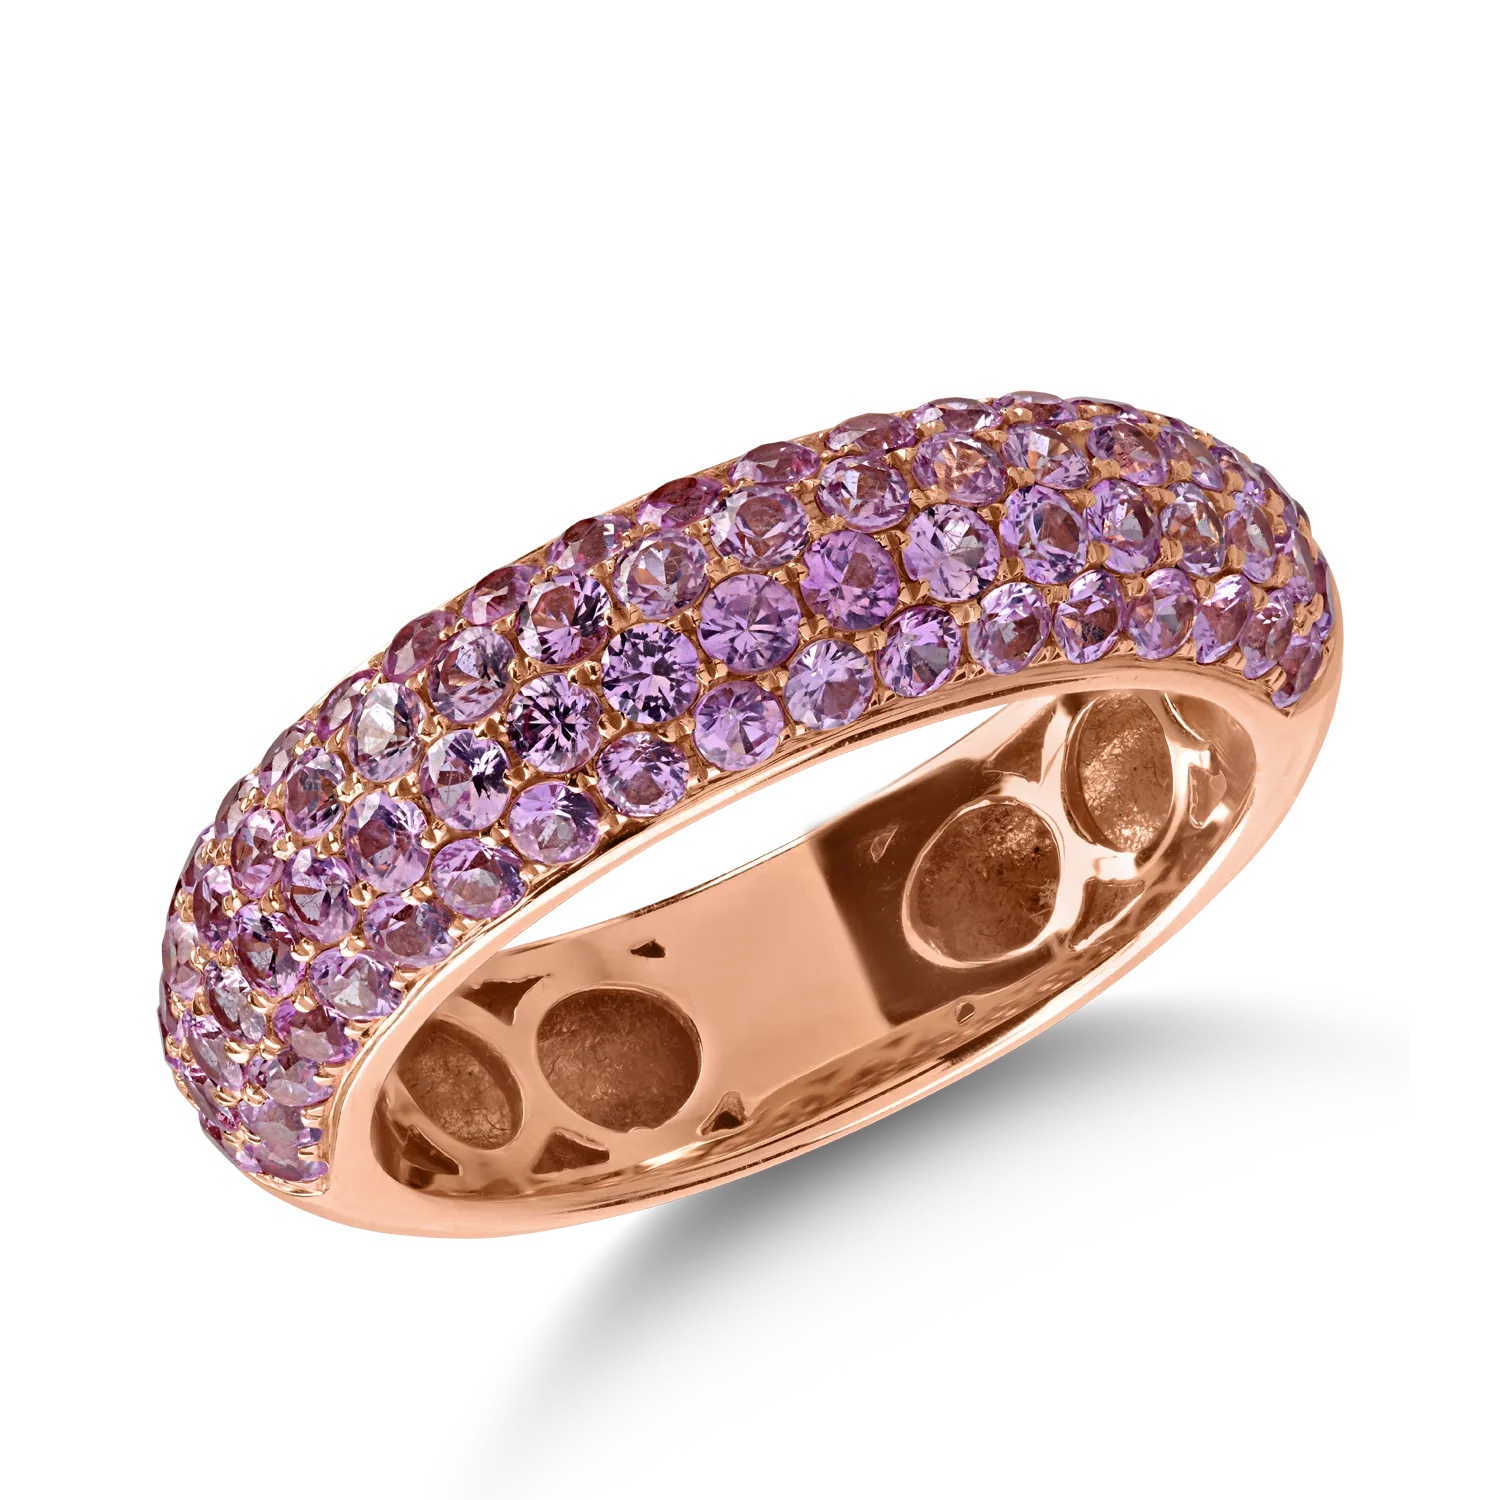 Half eternity ring in rose gold with 1.81ct light pink sapphires